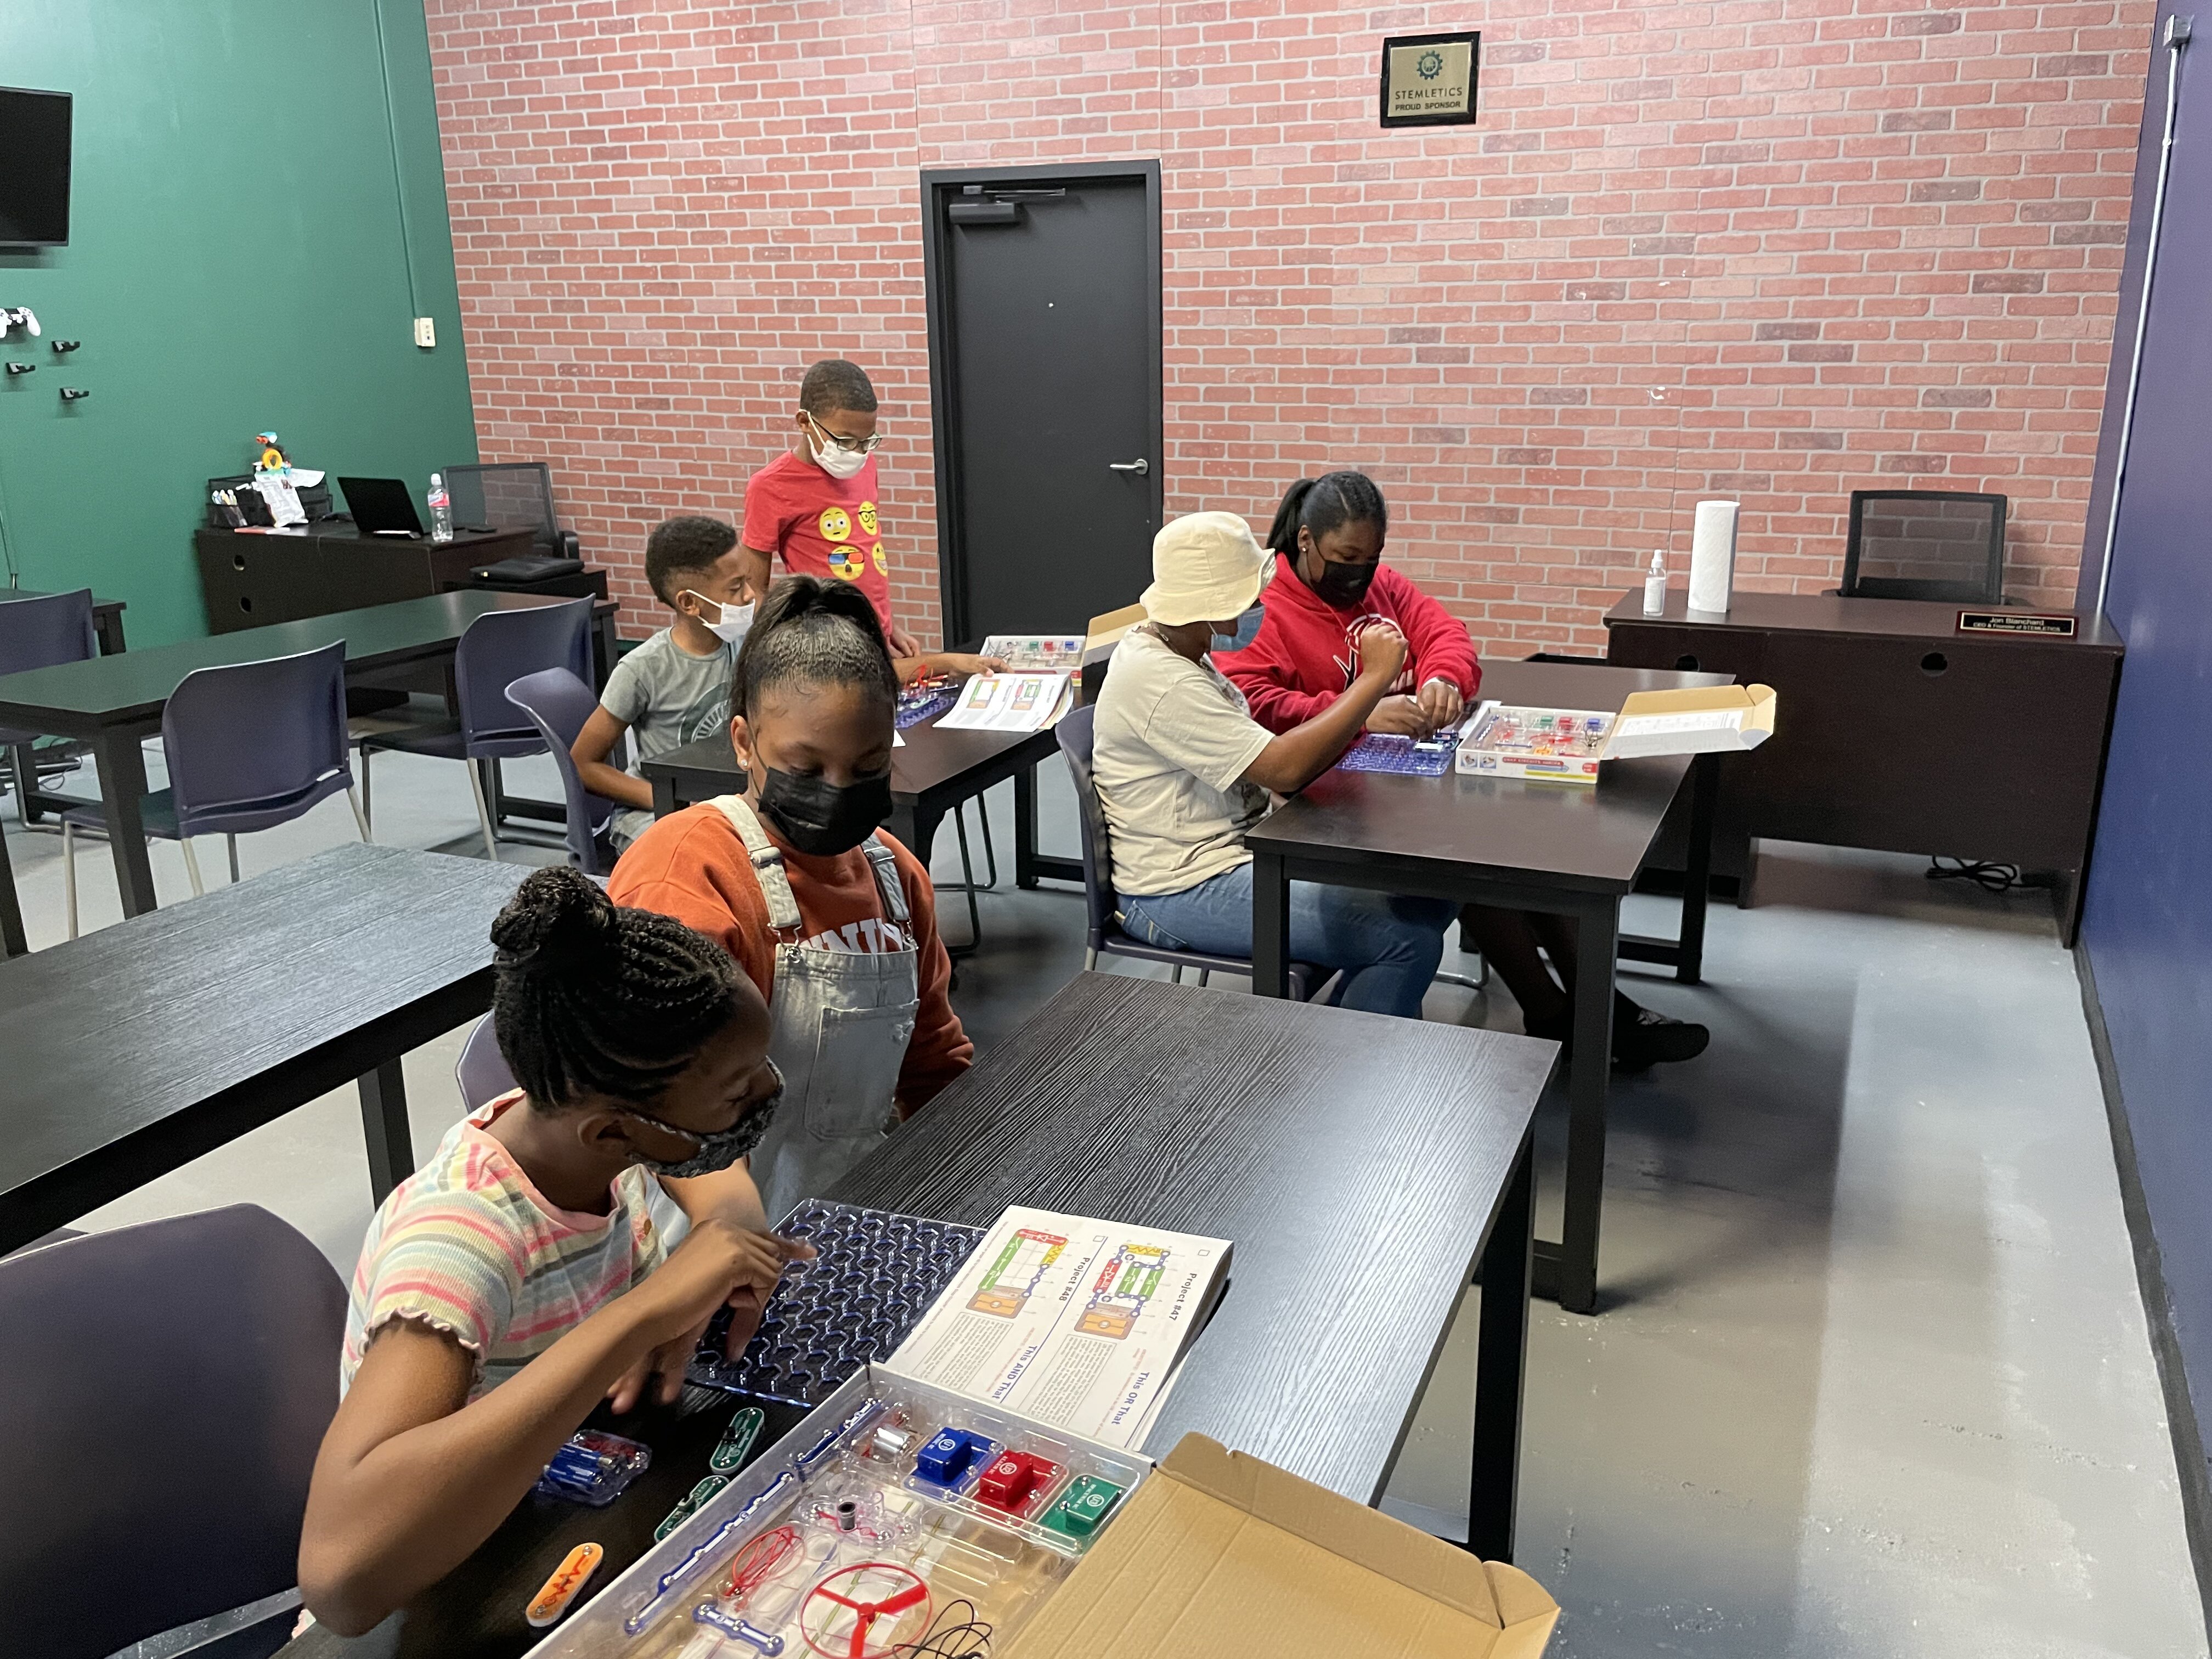 The facility encourages the youth to work together while learning together.